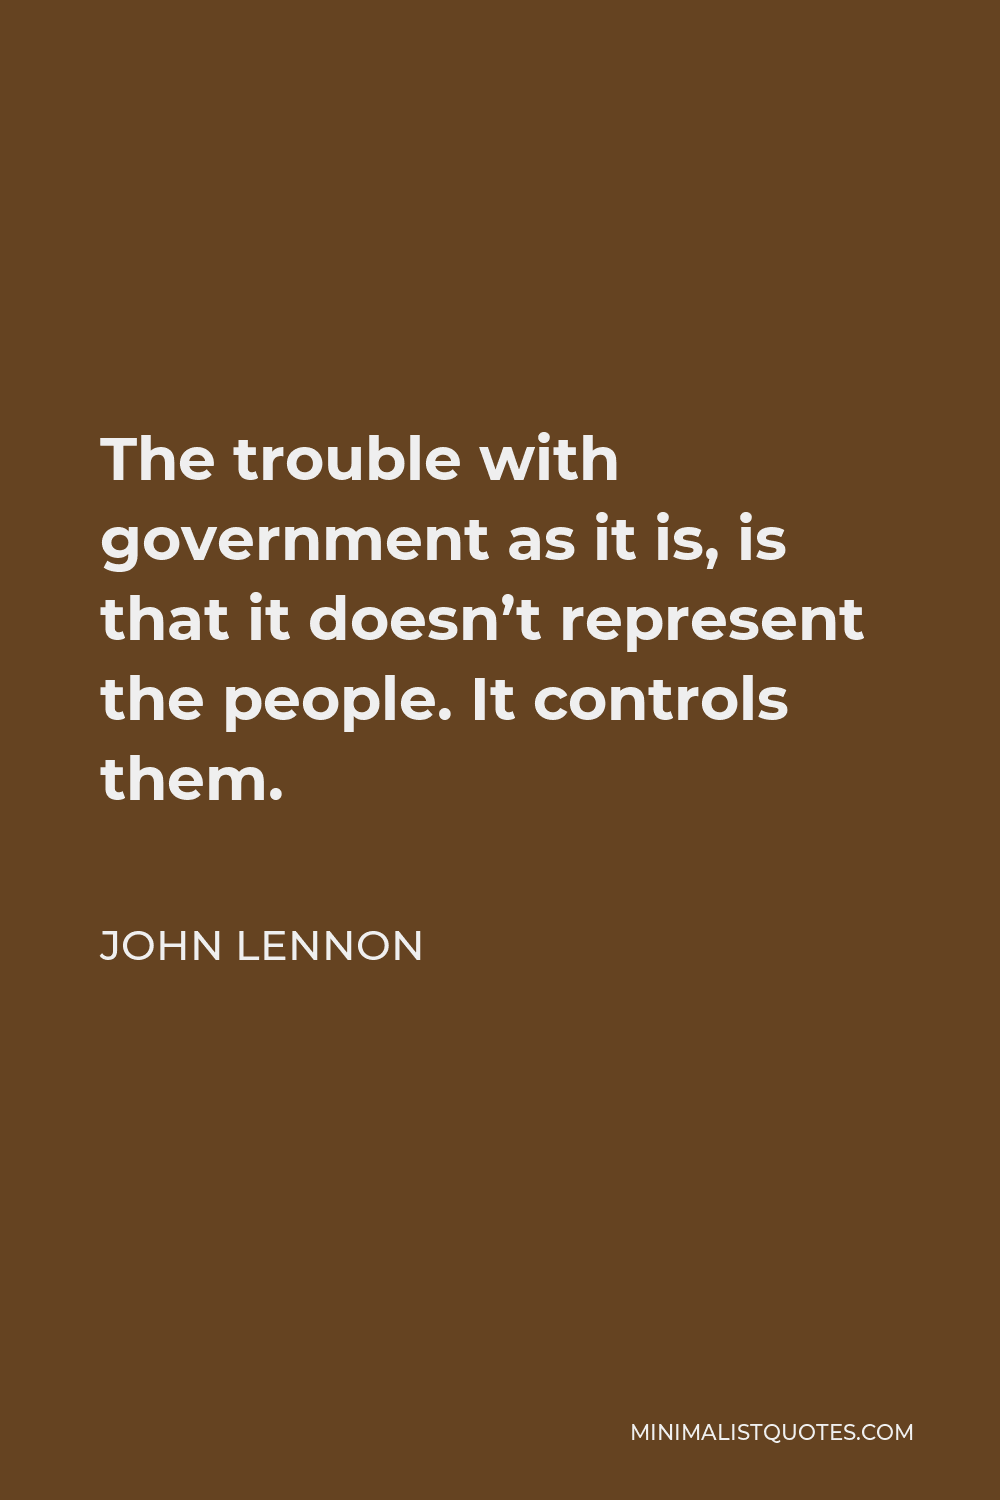 John Lennon Quote - The trouble with government as it is, is that it doesn’t represent the people. It controls them.